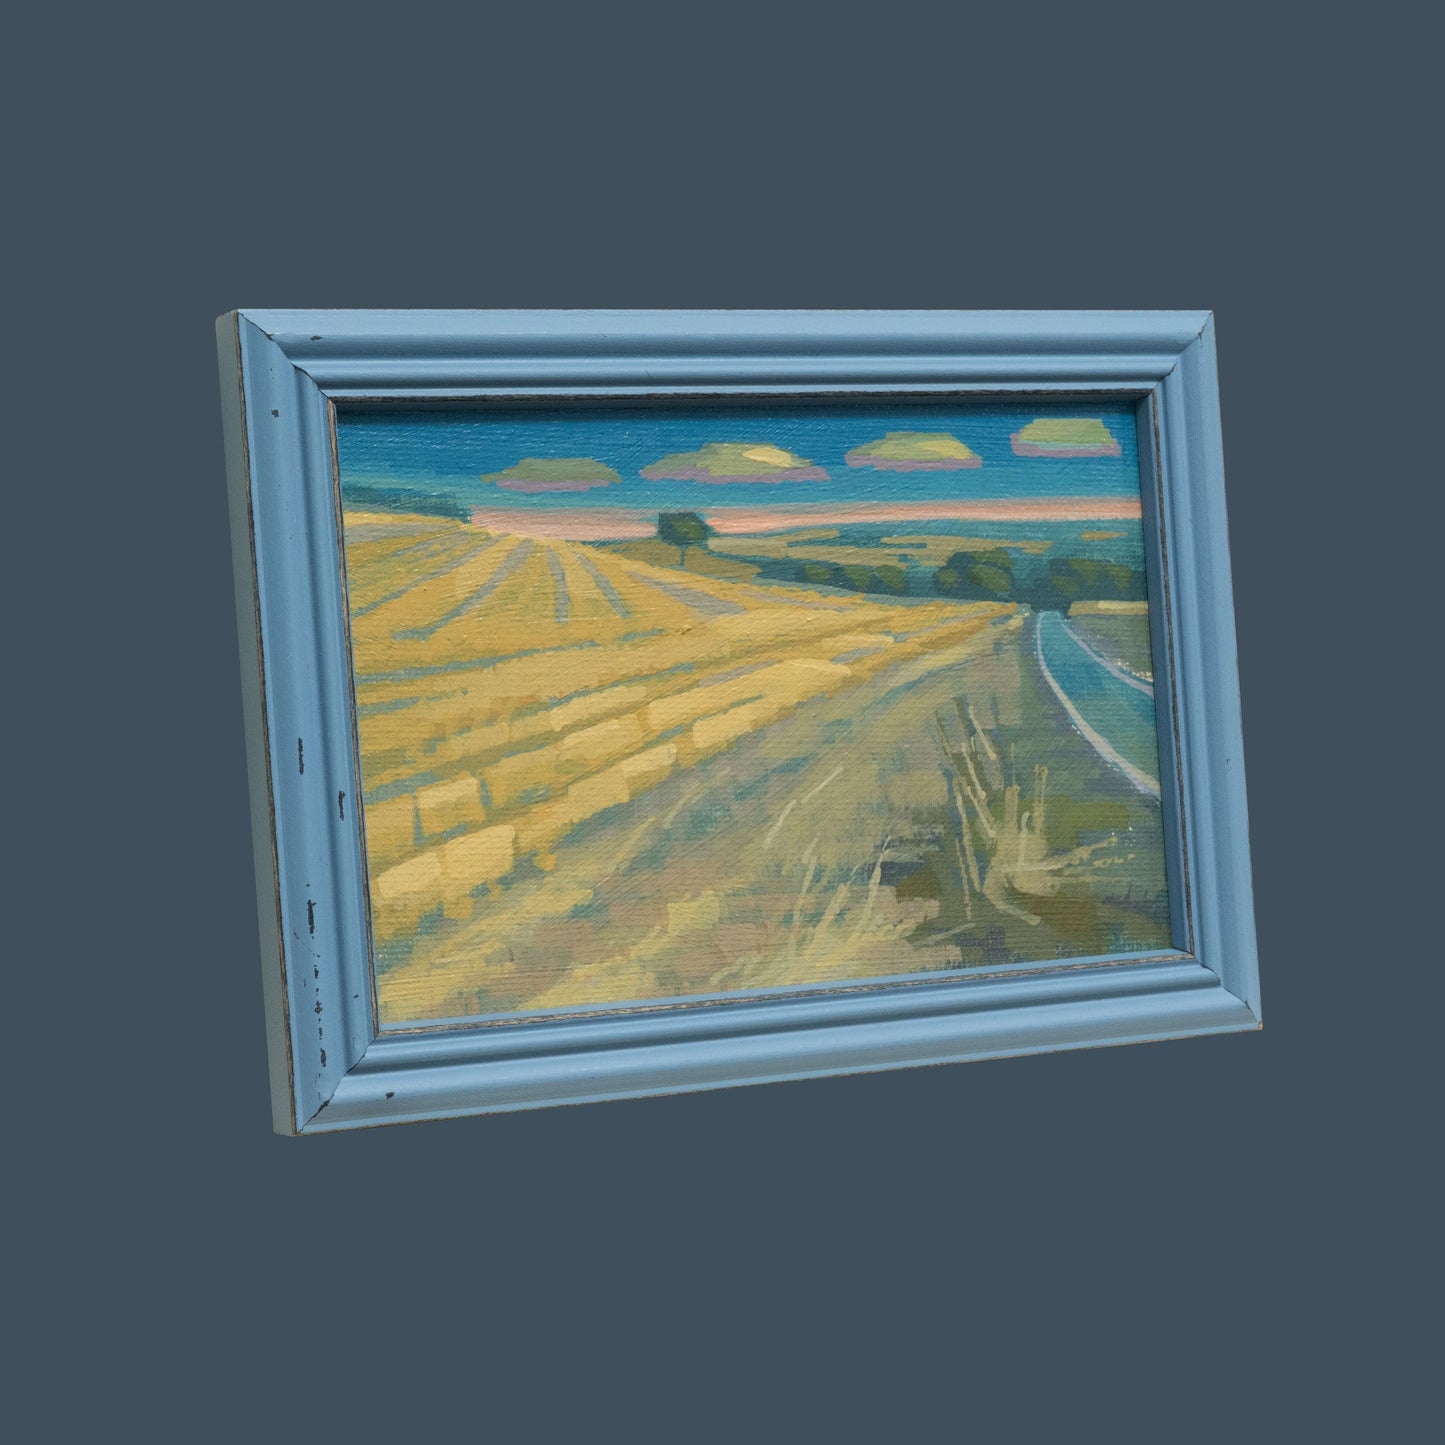 Original painting - "Summer Field" - hand painted - acrylic painting - 10x15 cm - landscape picture - unique piece - with frame